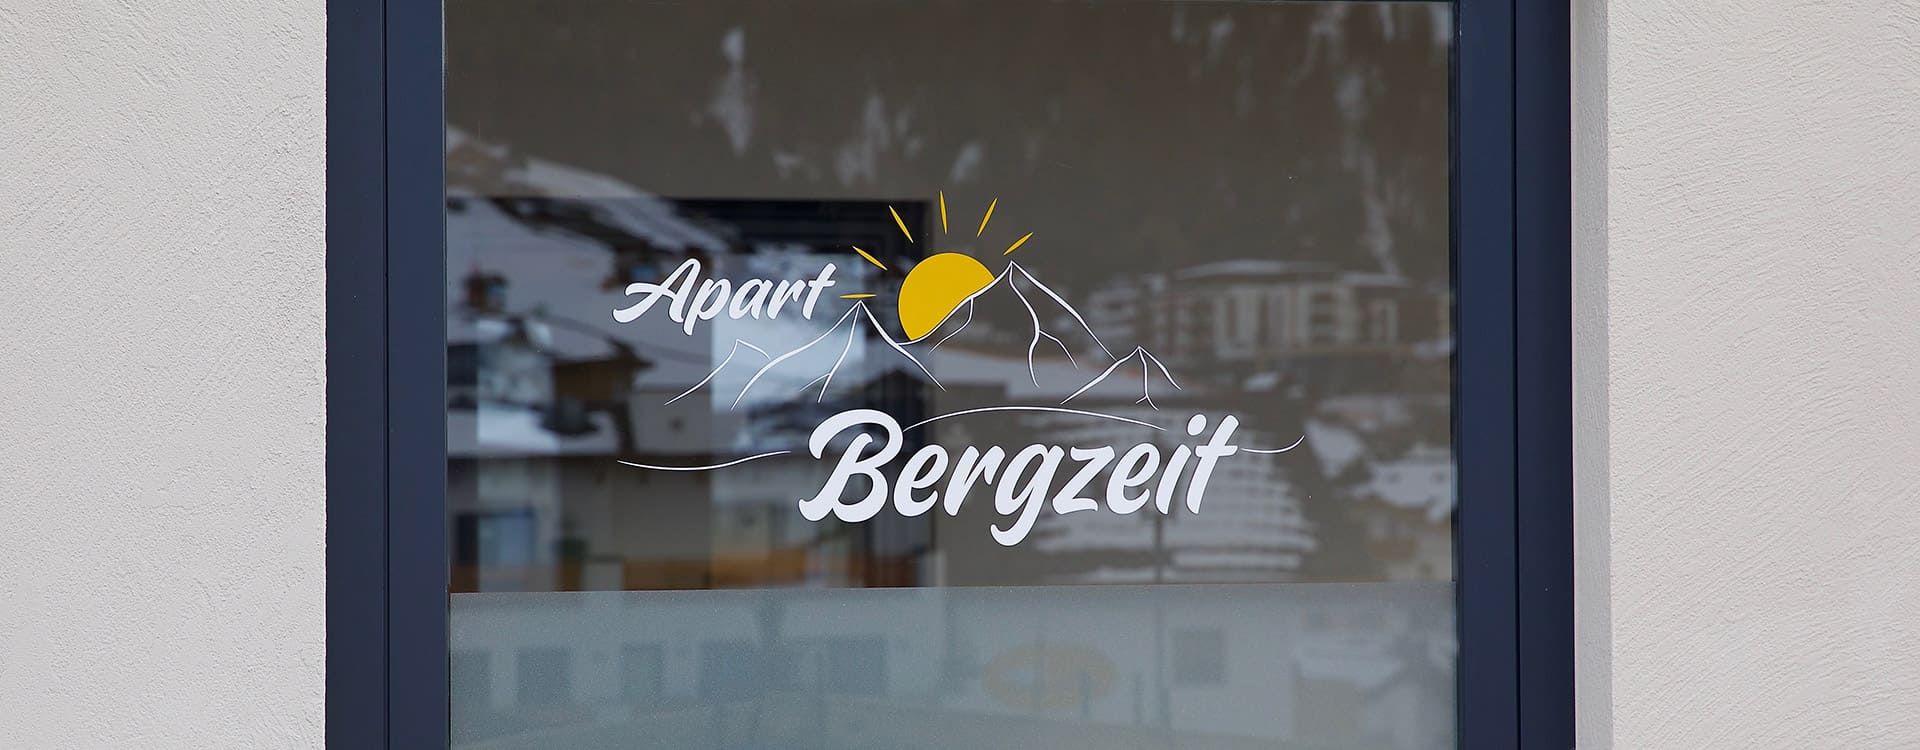 Window with logo from Apart Bergzeit